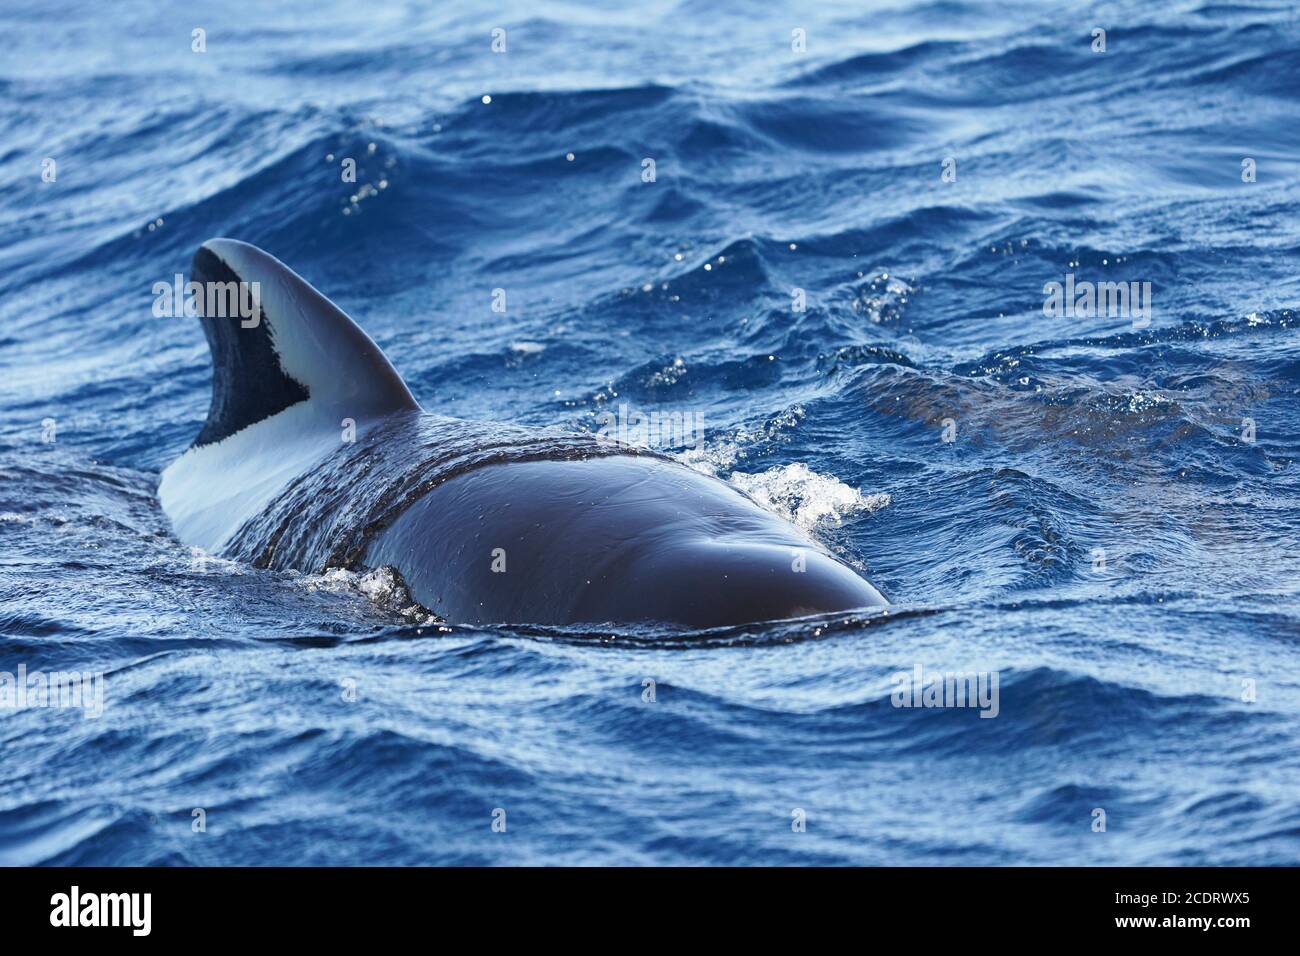 Long-finned pilot whales (Globicephala melas) spotted during whale watching trip. Strait of Gibraltar, Spain. Stock Photo